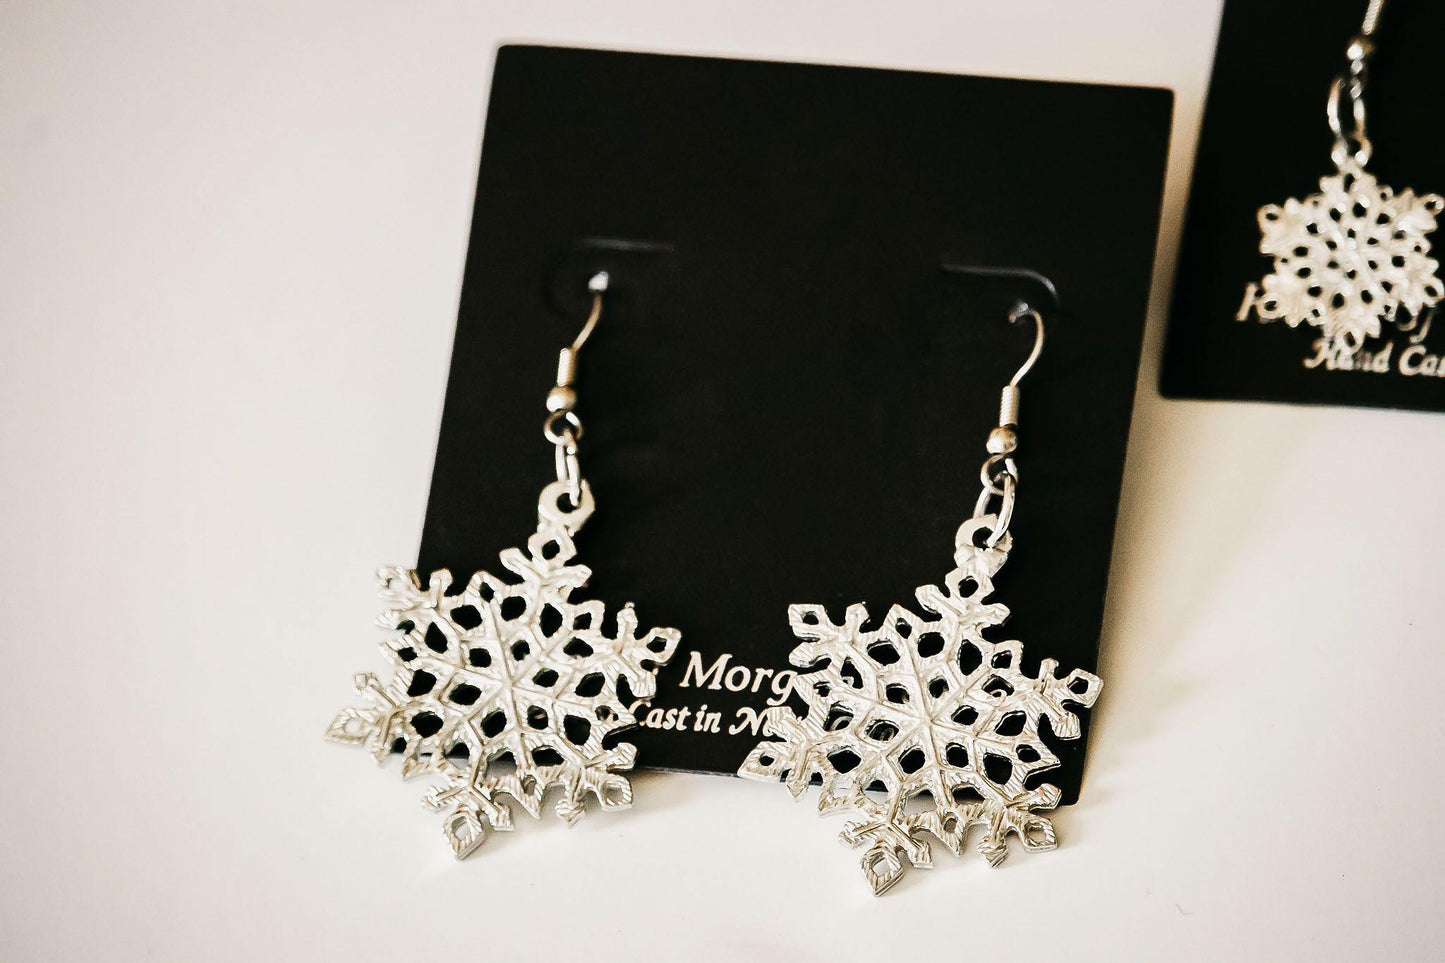 Handcrafted Winter Snowflake Hanging Earrings, Women Accessory Jewelry - House of Morgan Pewter